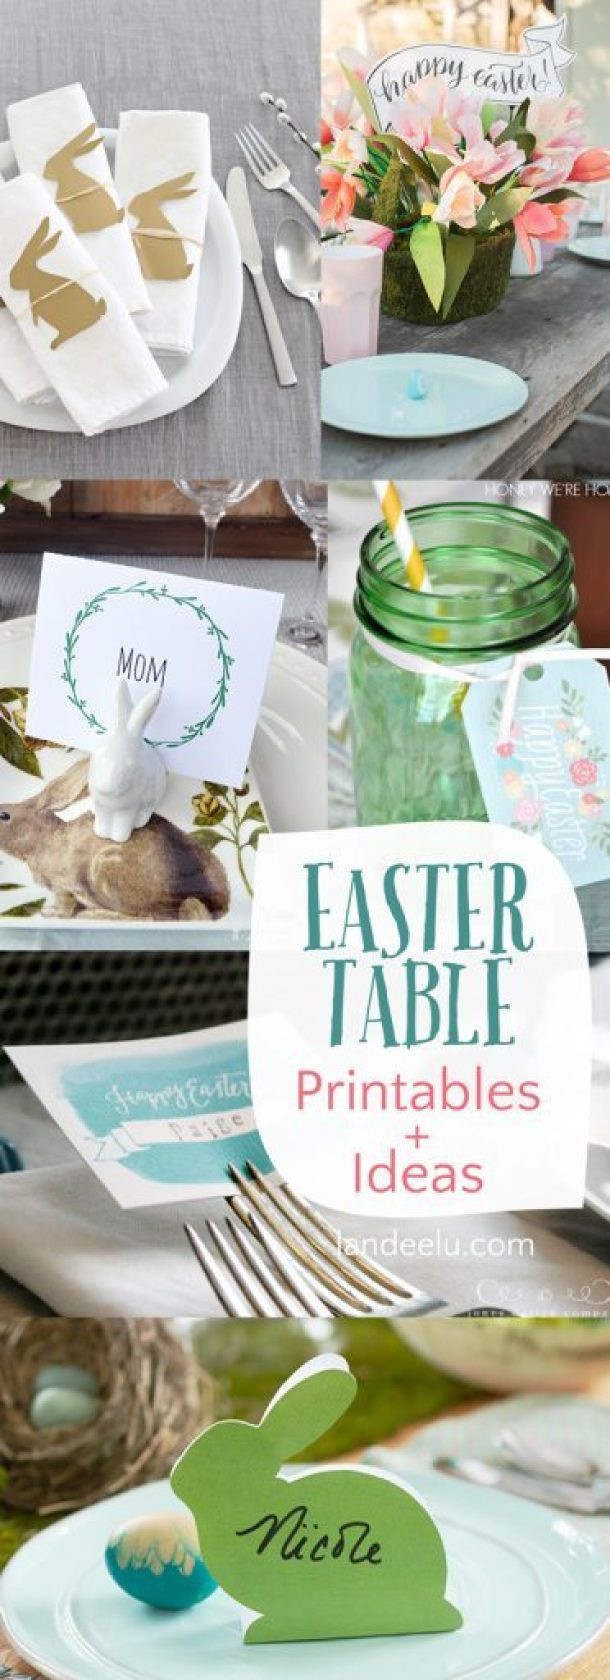 Easter Office Party Ideas
 Easter Table Printables and Ideas